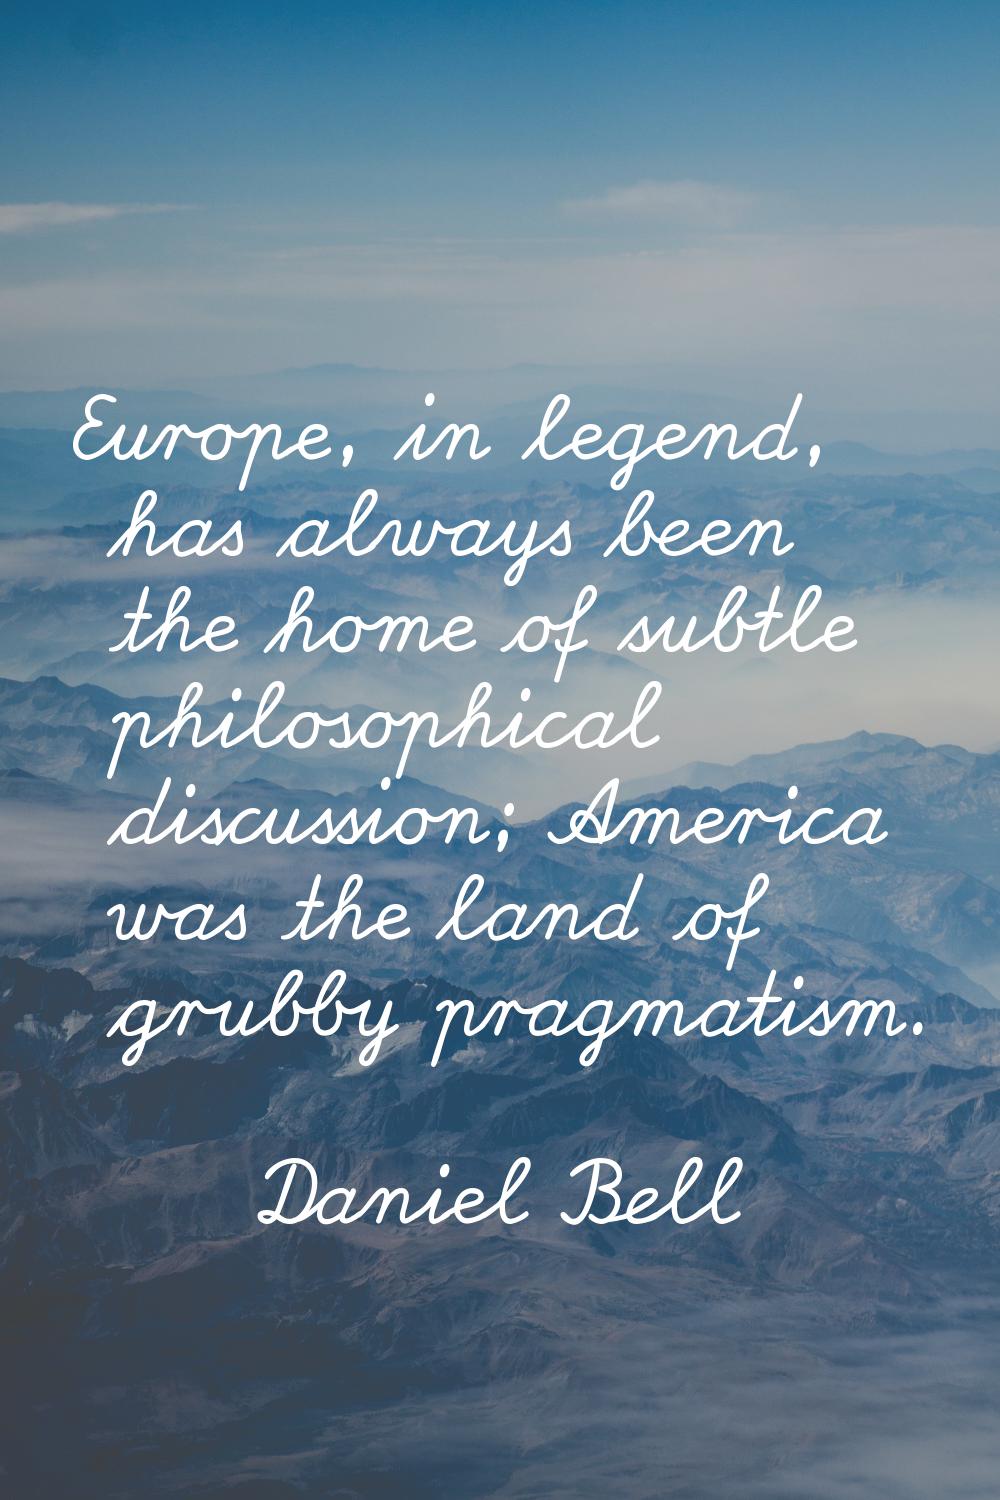 Europe, in legend, has always been the home of subtle philosophical discussion; America was the lan